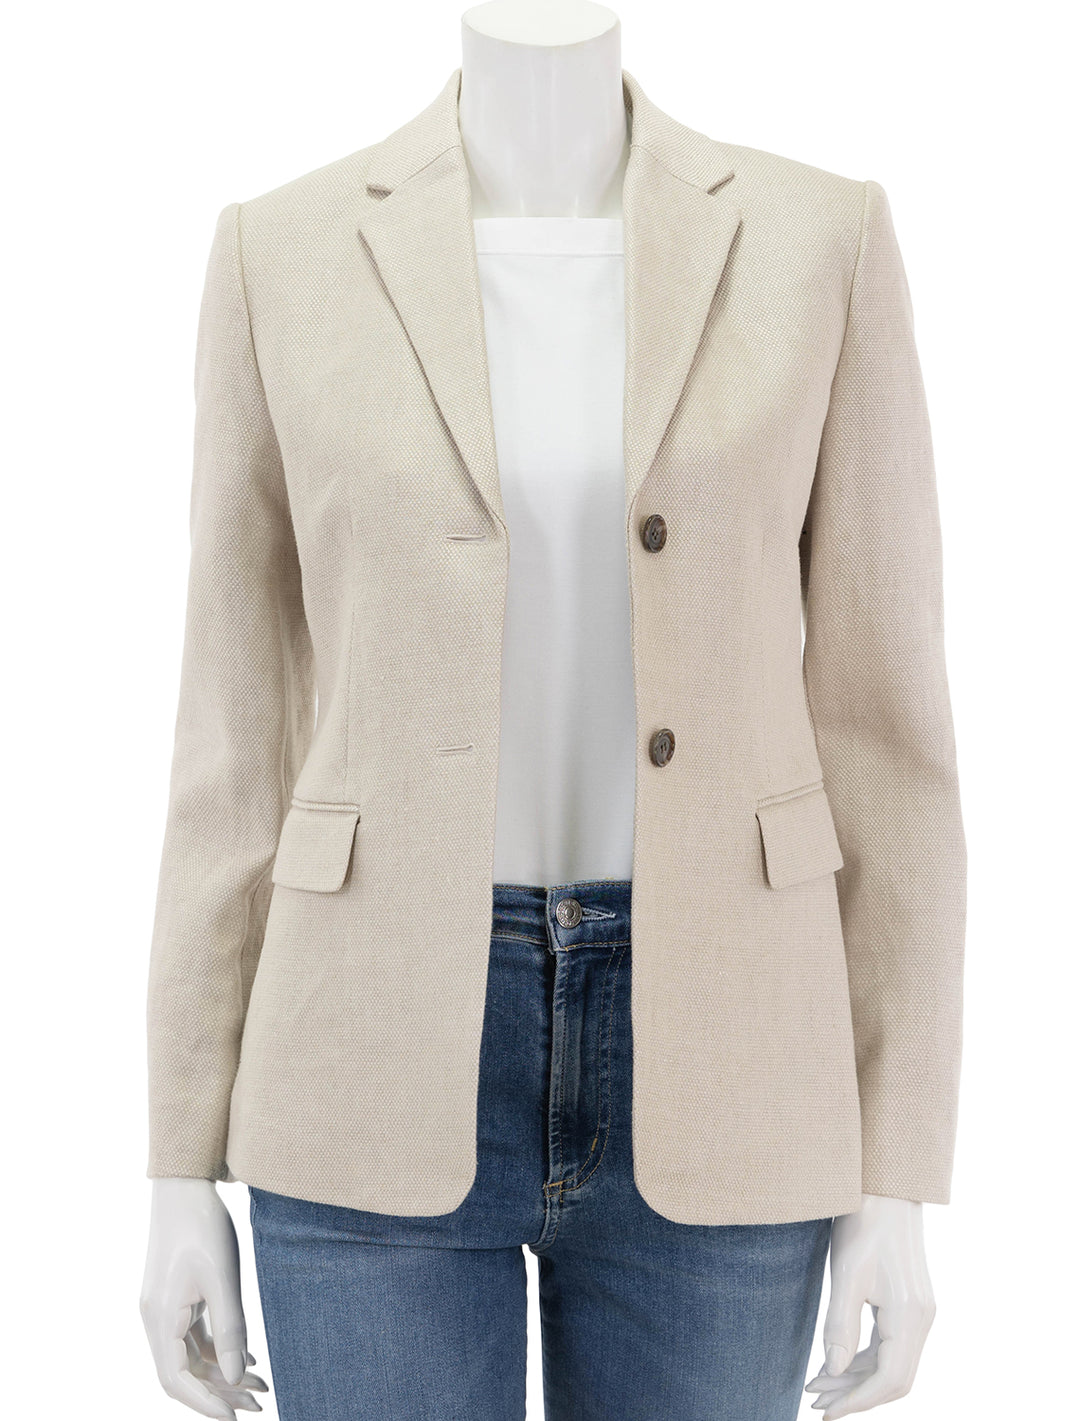 Front view of Theory's slim blazer in straw basketweave linen, unbuttoned.